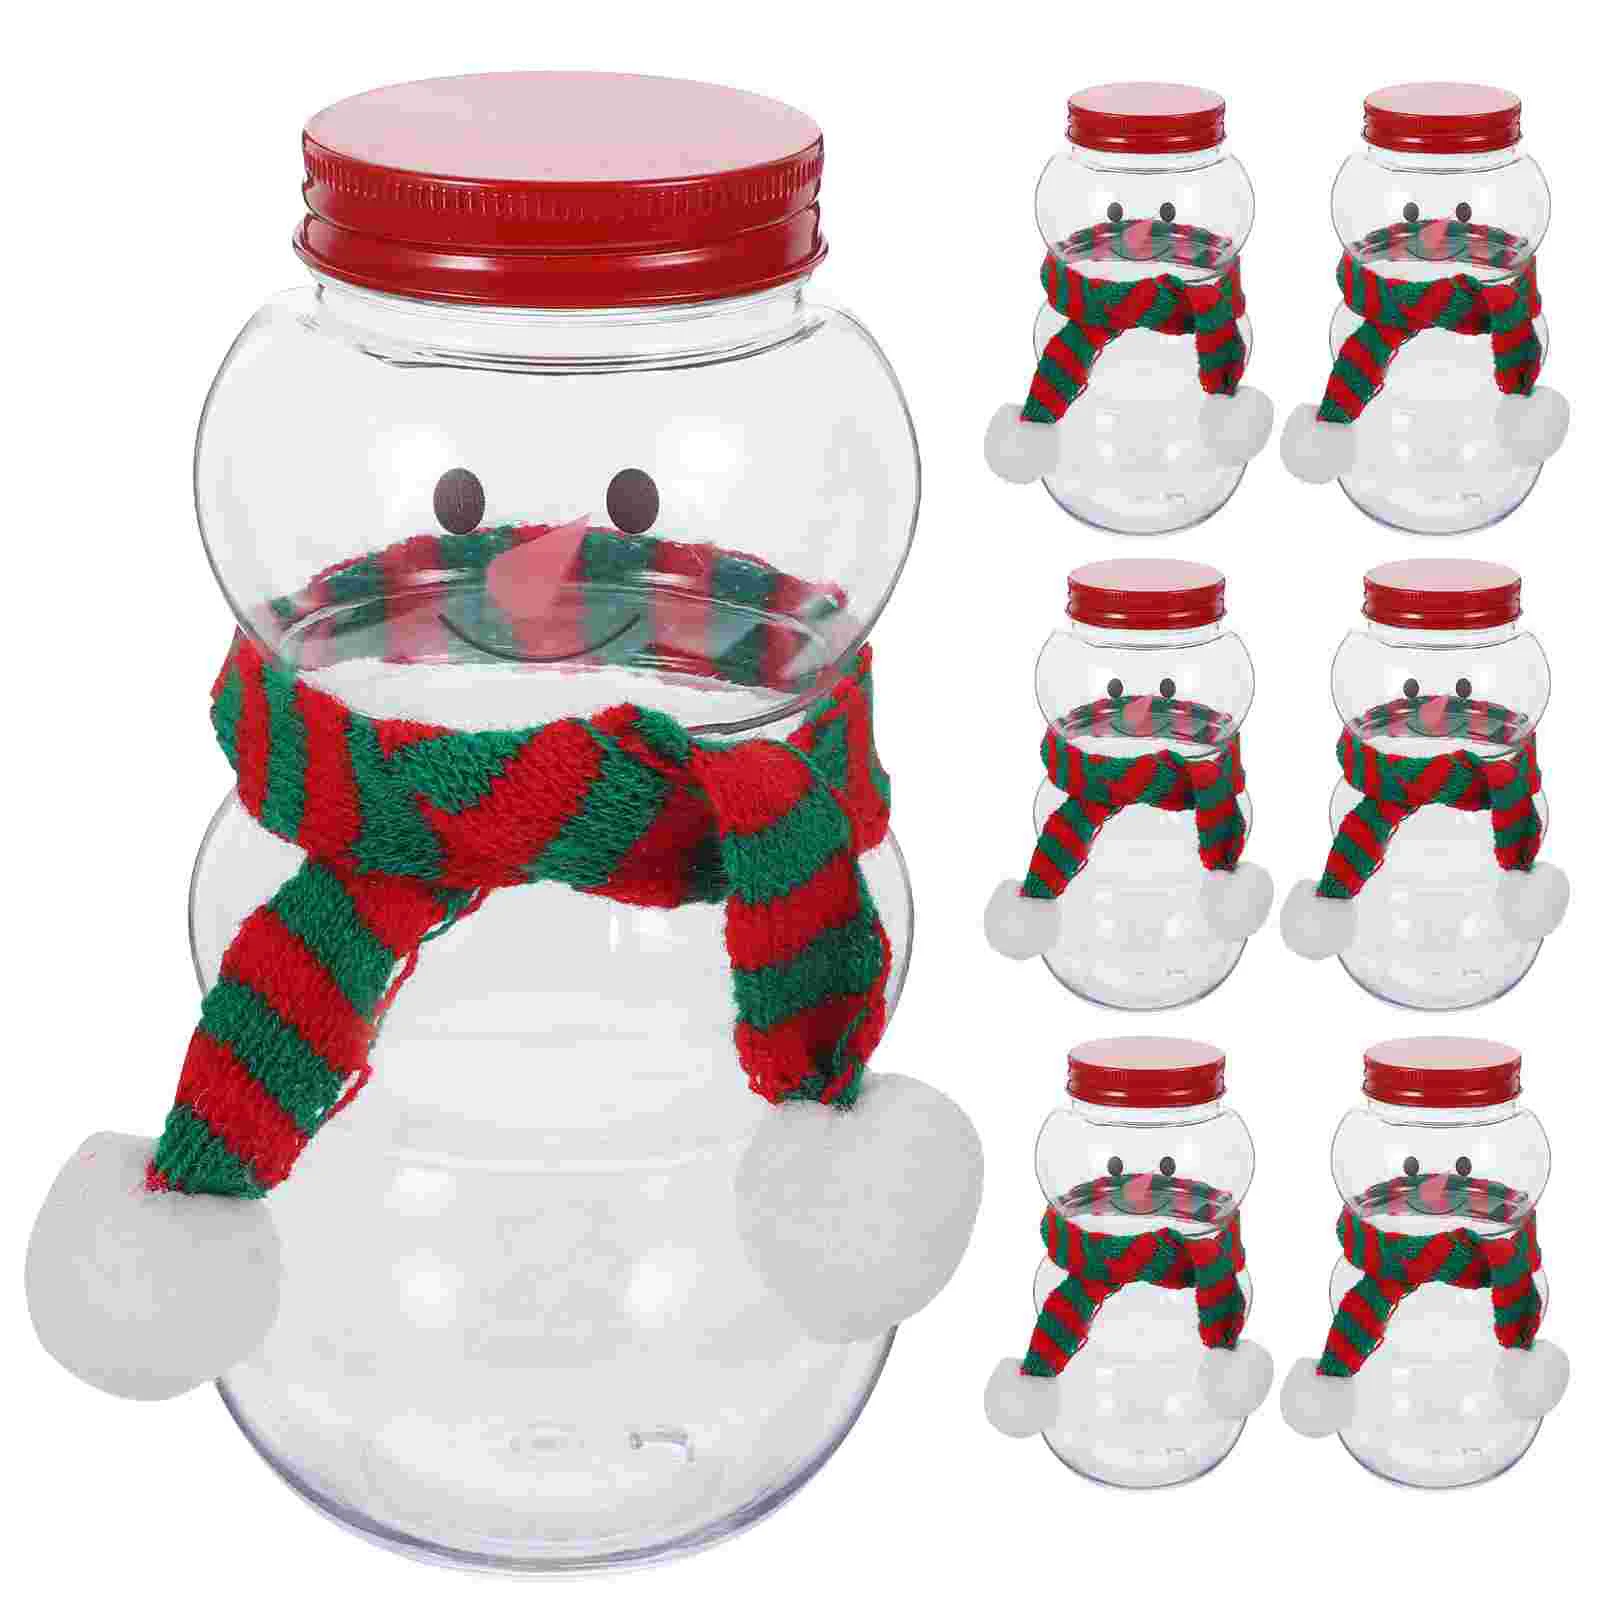 

10 Sets Drink Cup Drinking Candy Jars Party Beverage Bottles Gift Empty Milk Juice Caps Portable Wrapping The Pet Lids